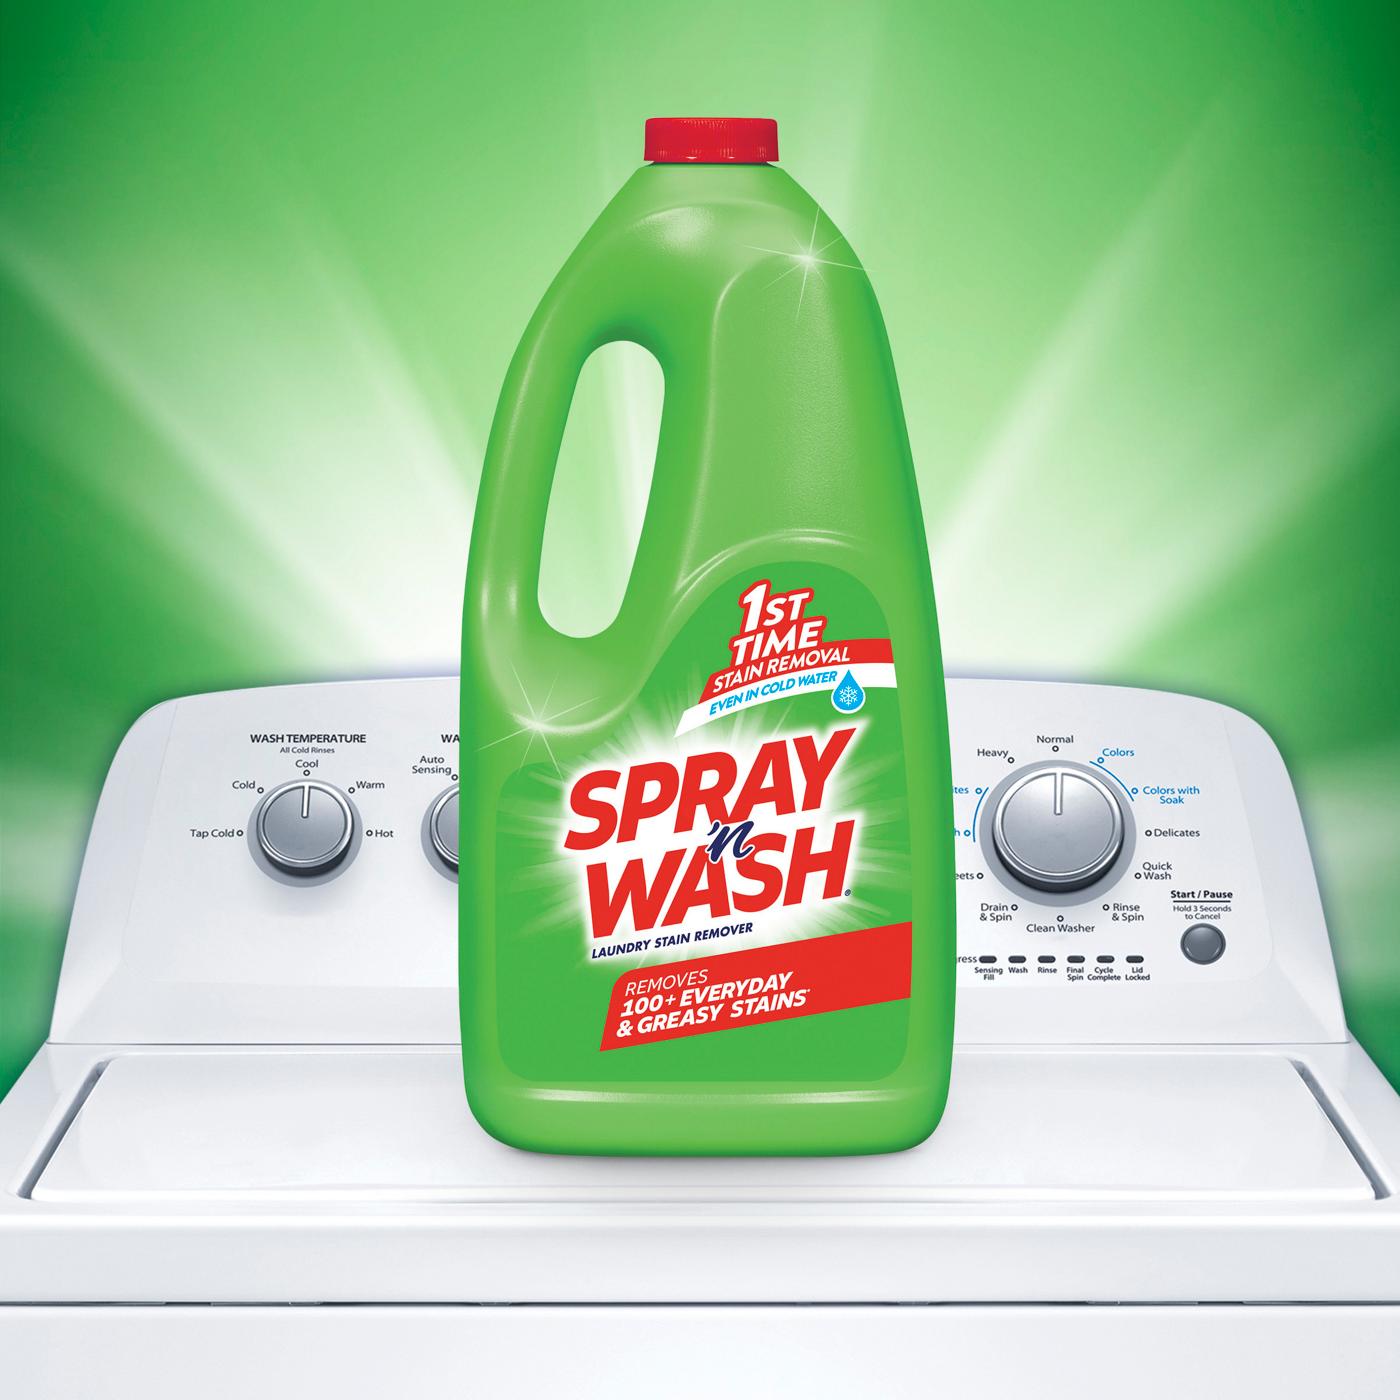 Spray 'n Wash Laundry Stain Remover; image 3 of 8